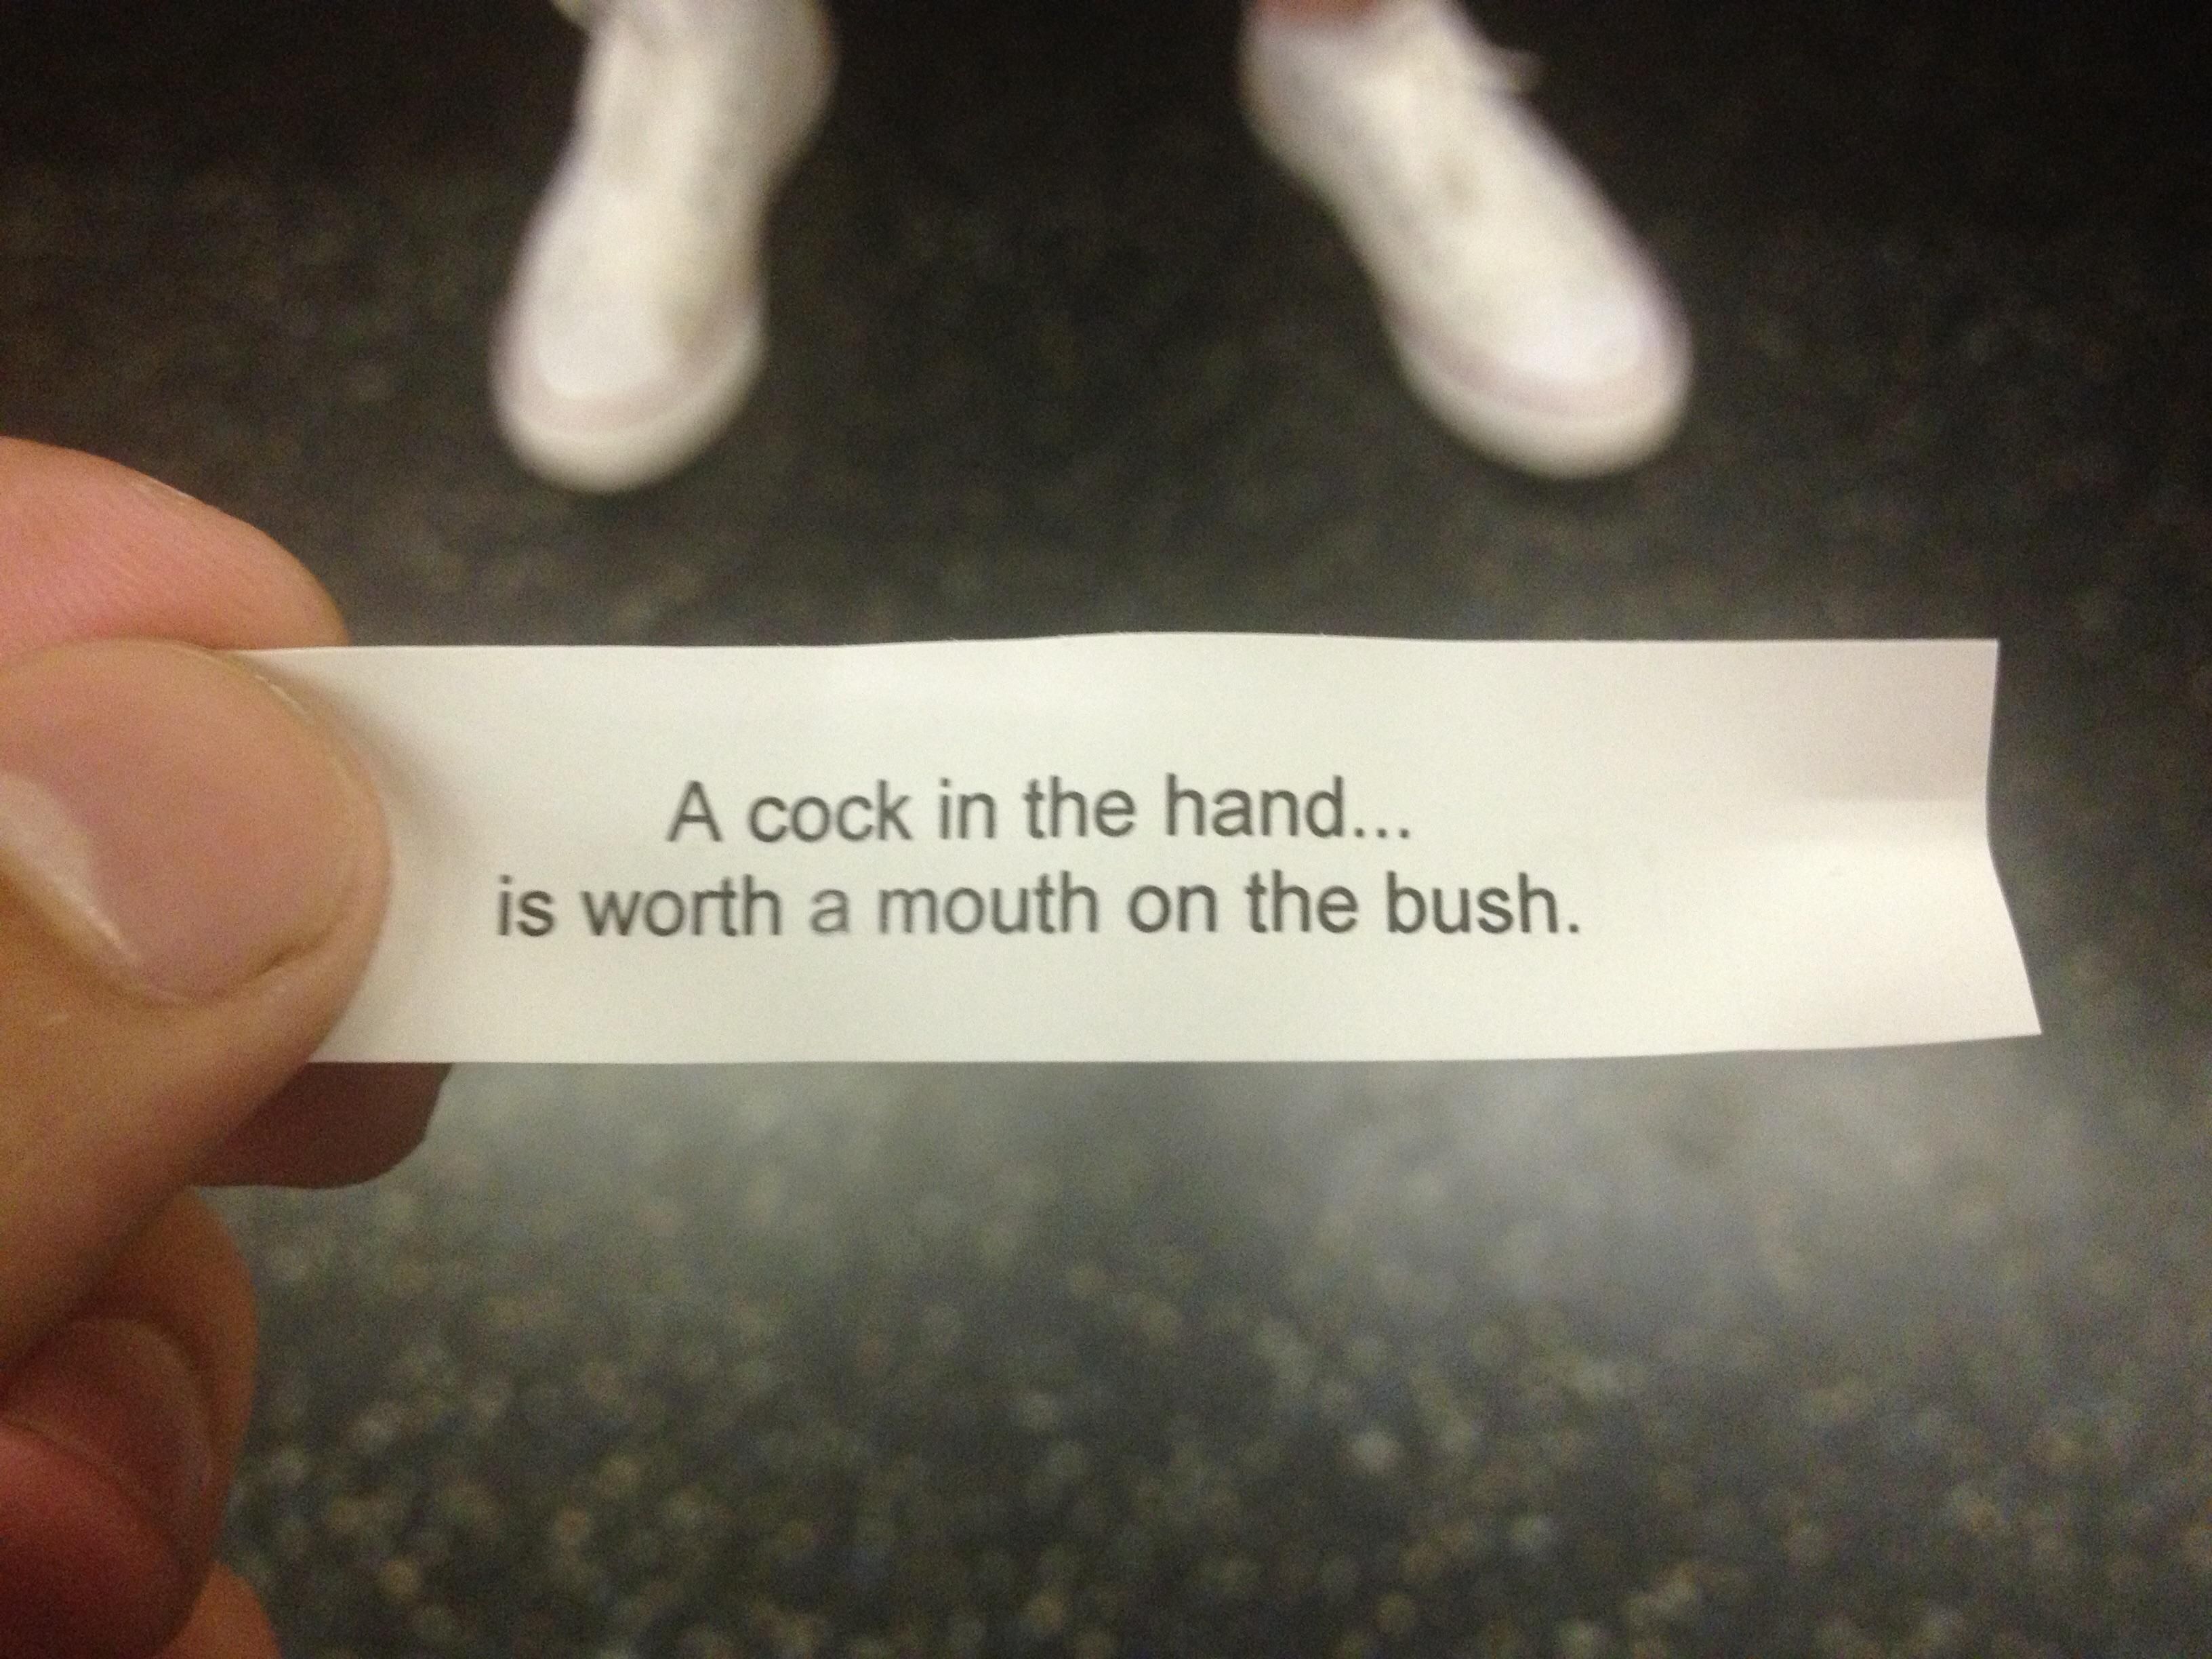 This was on a fortune cookie given to me at the pride parade